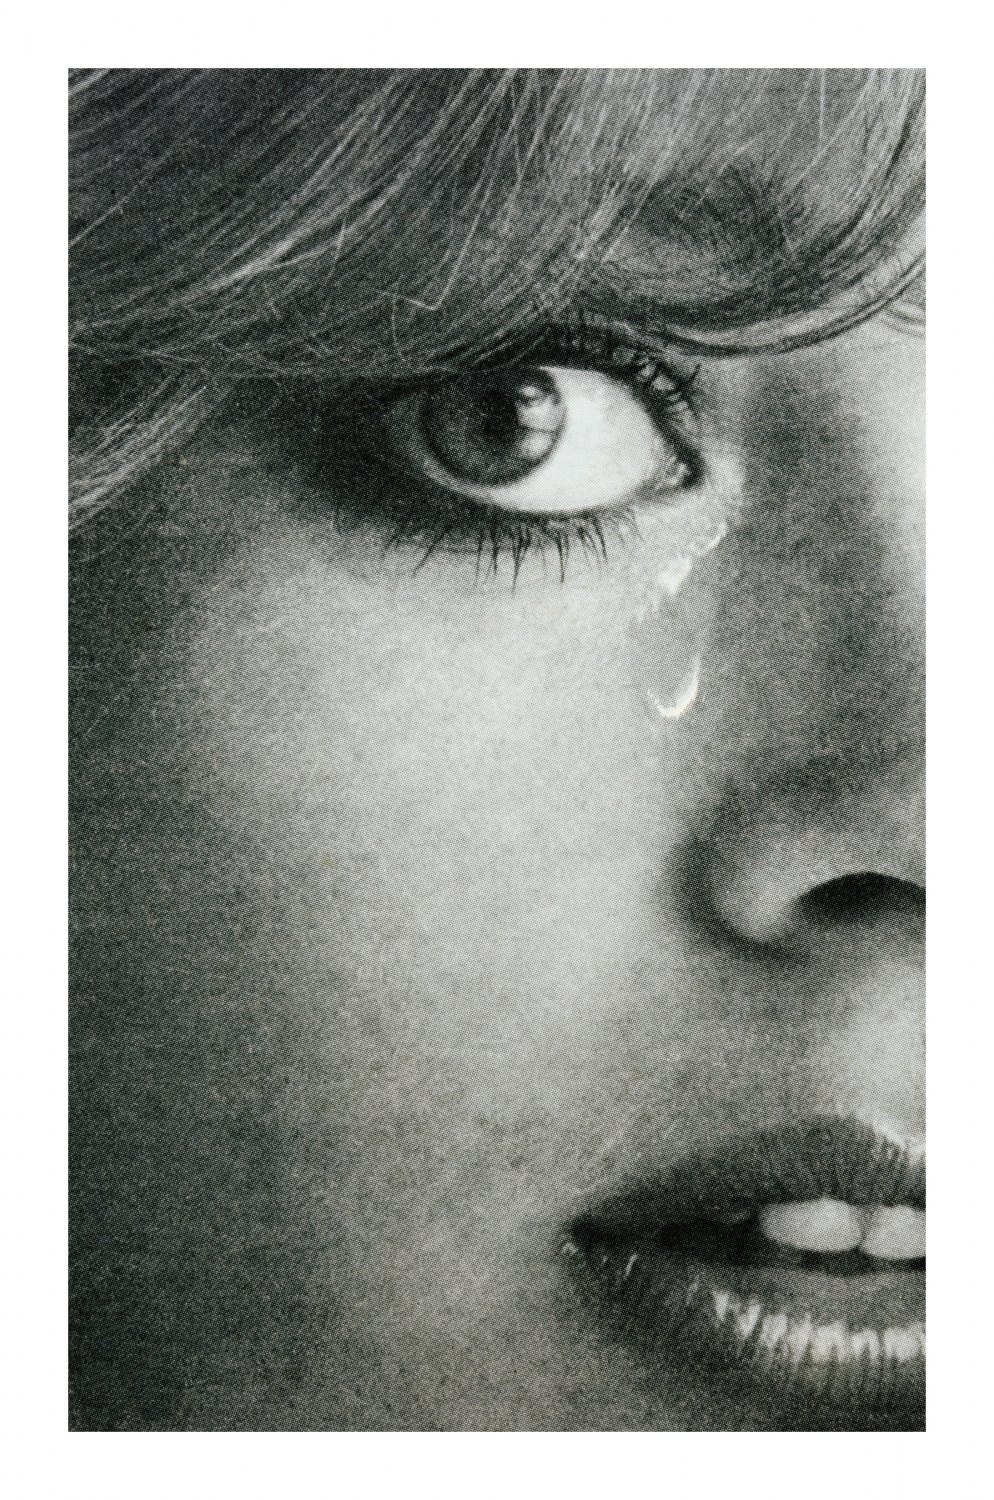 Anne Collier Woman Crying #15, 2018 C-print, 135 x 87 cm